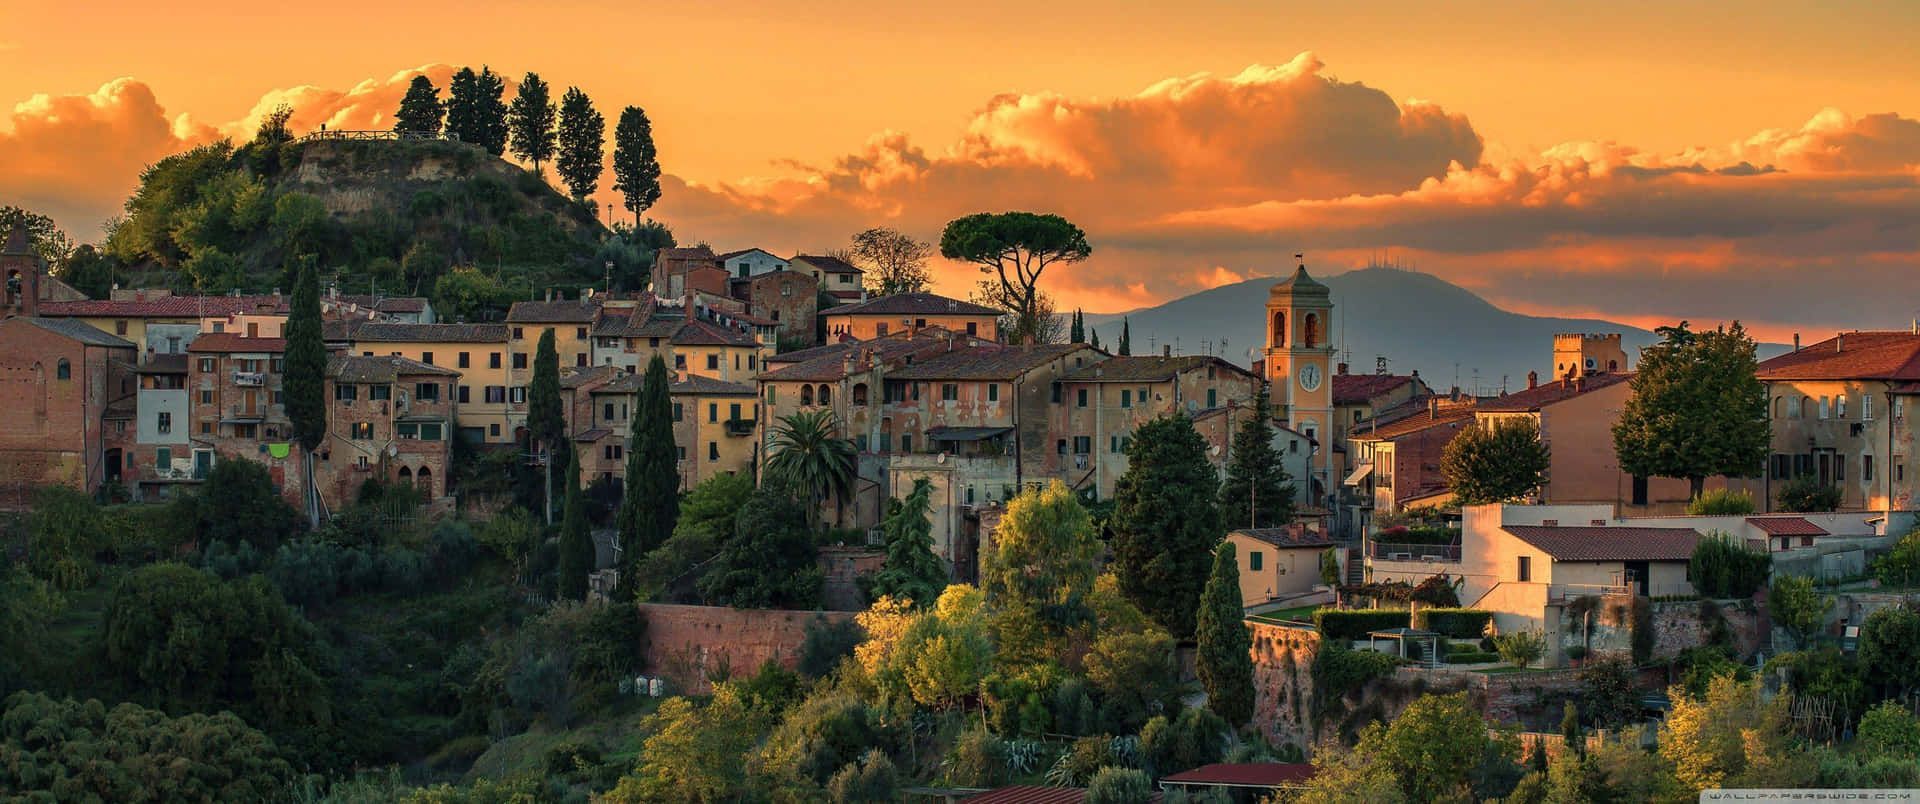 The city of Montepulciano in Italy, nestled in the hills. - Italy